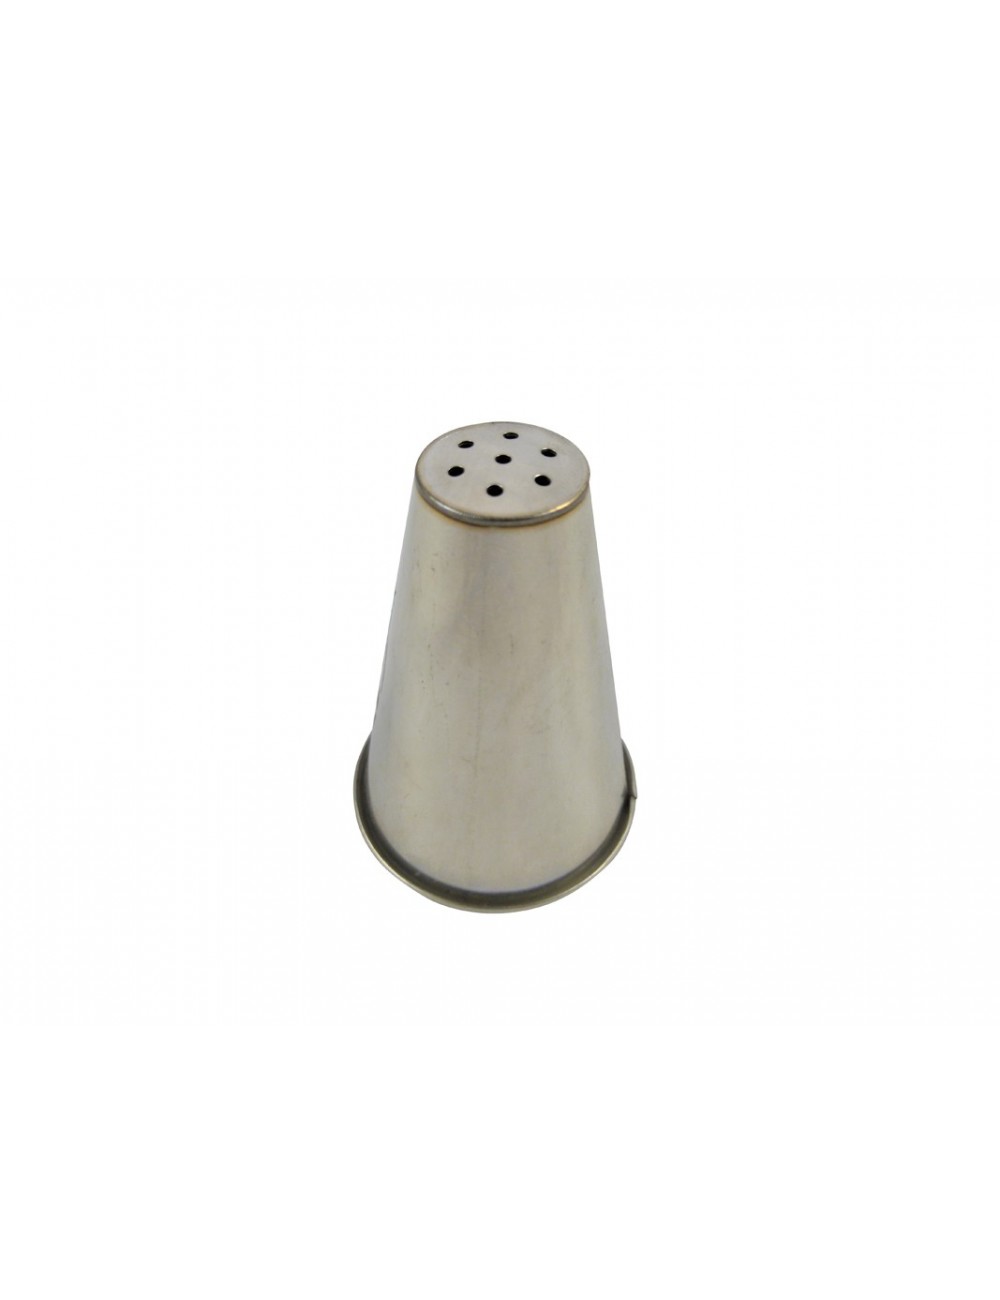 NEST NOZZLE - STAINLESS STEEL